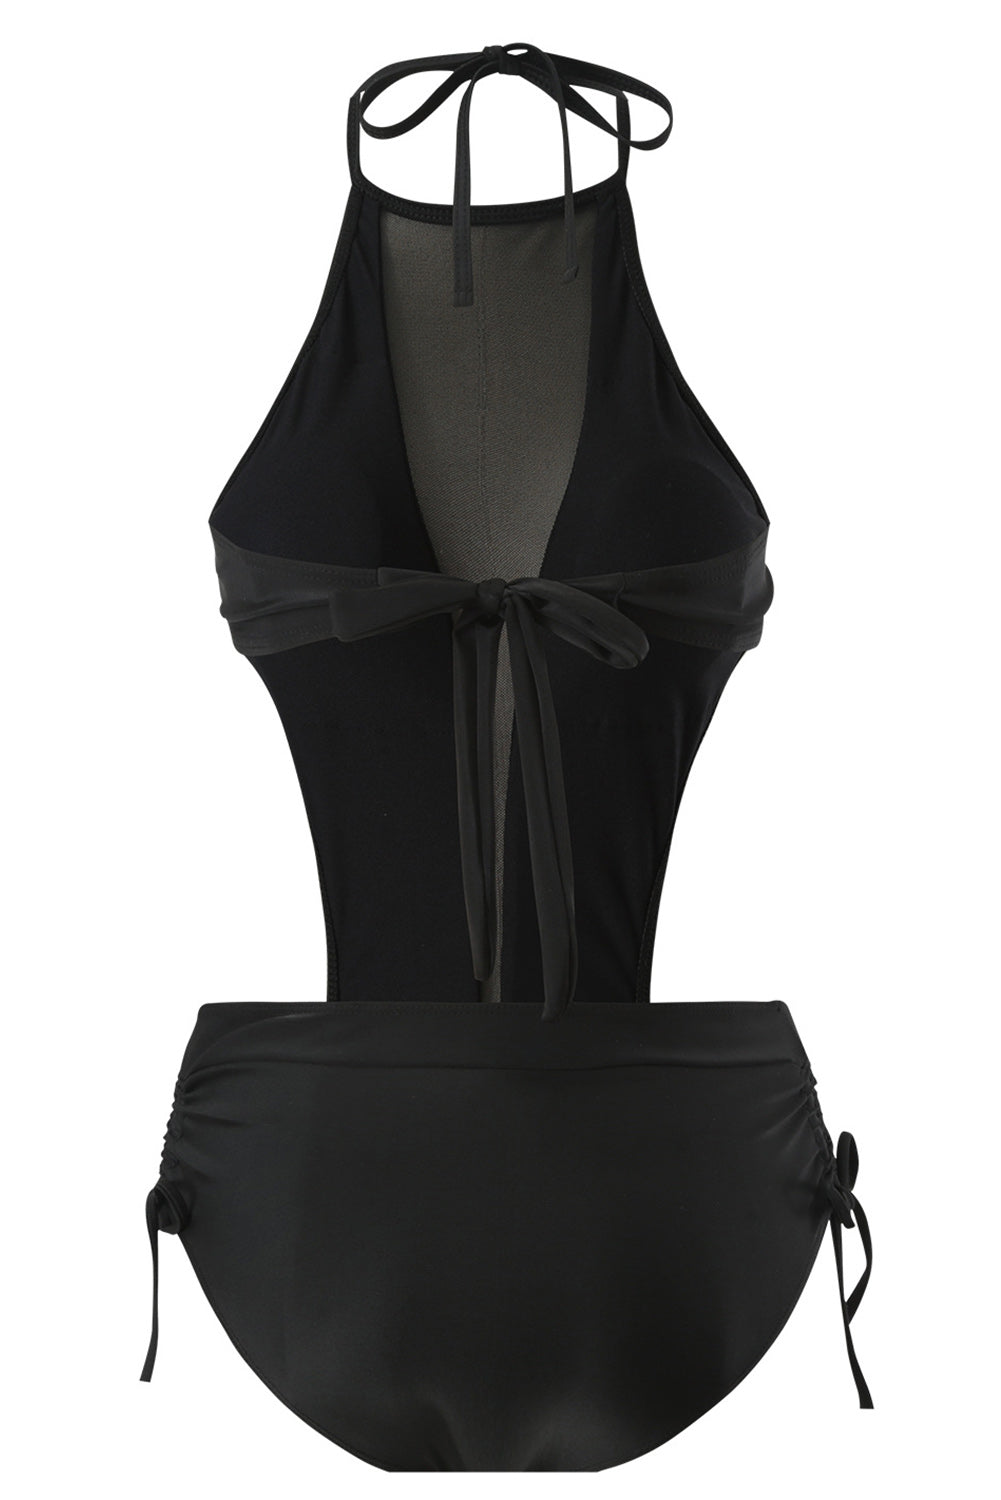 Black Knotted Halter Backless One Piece Swimsuit